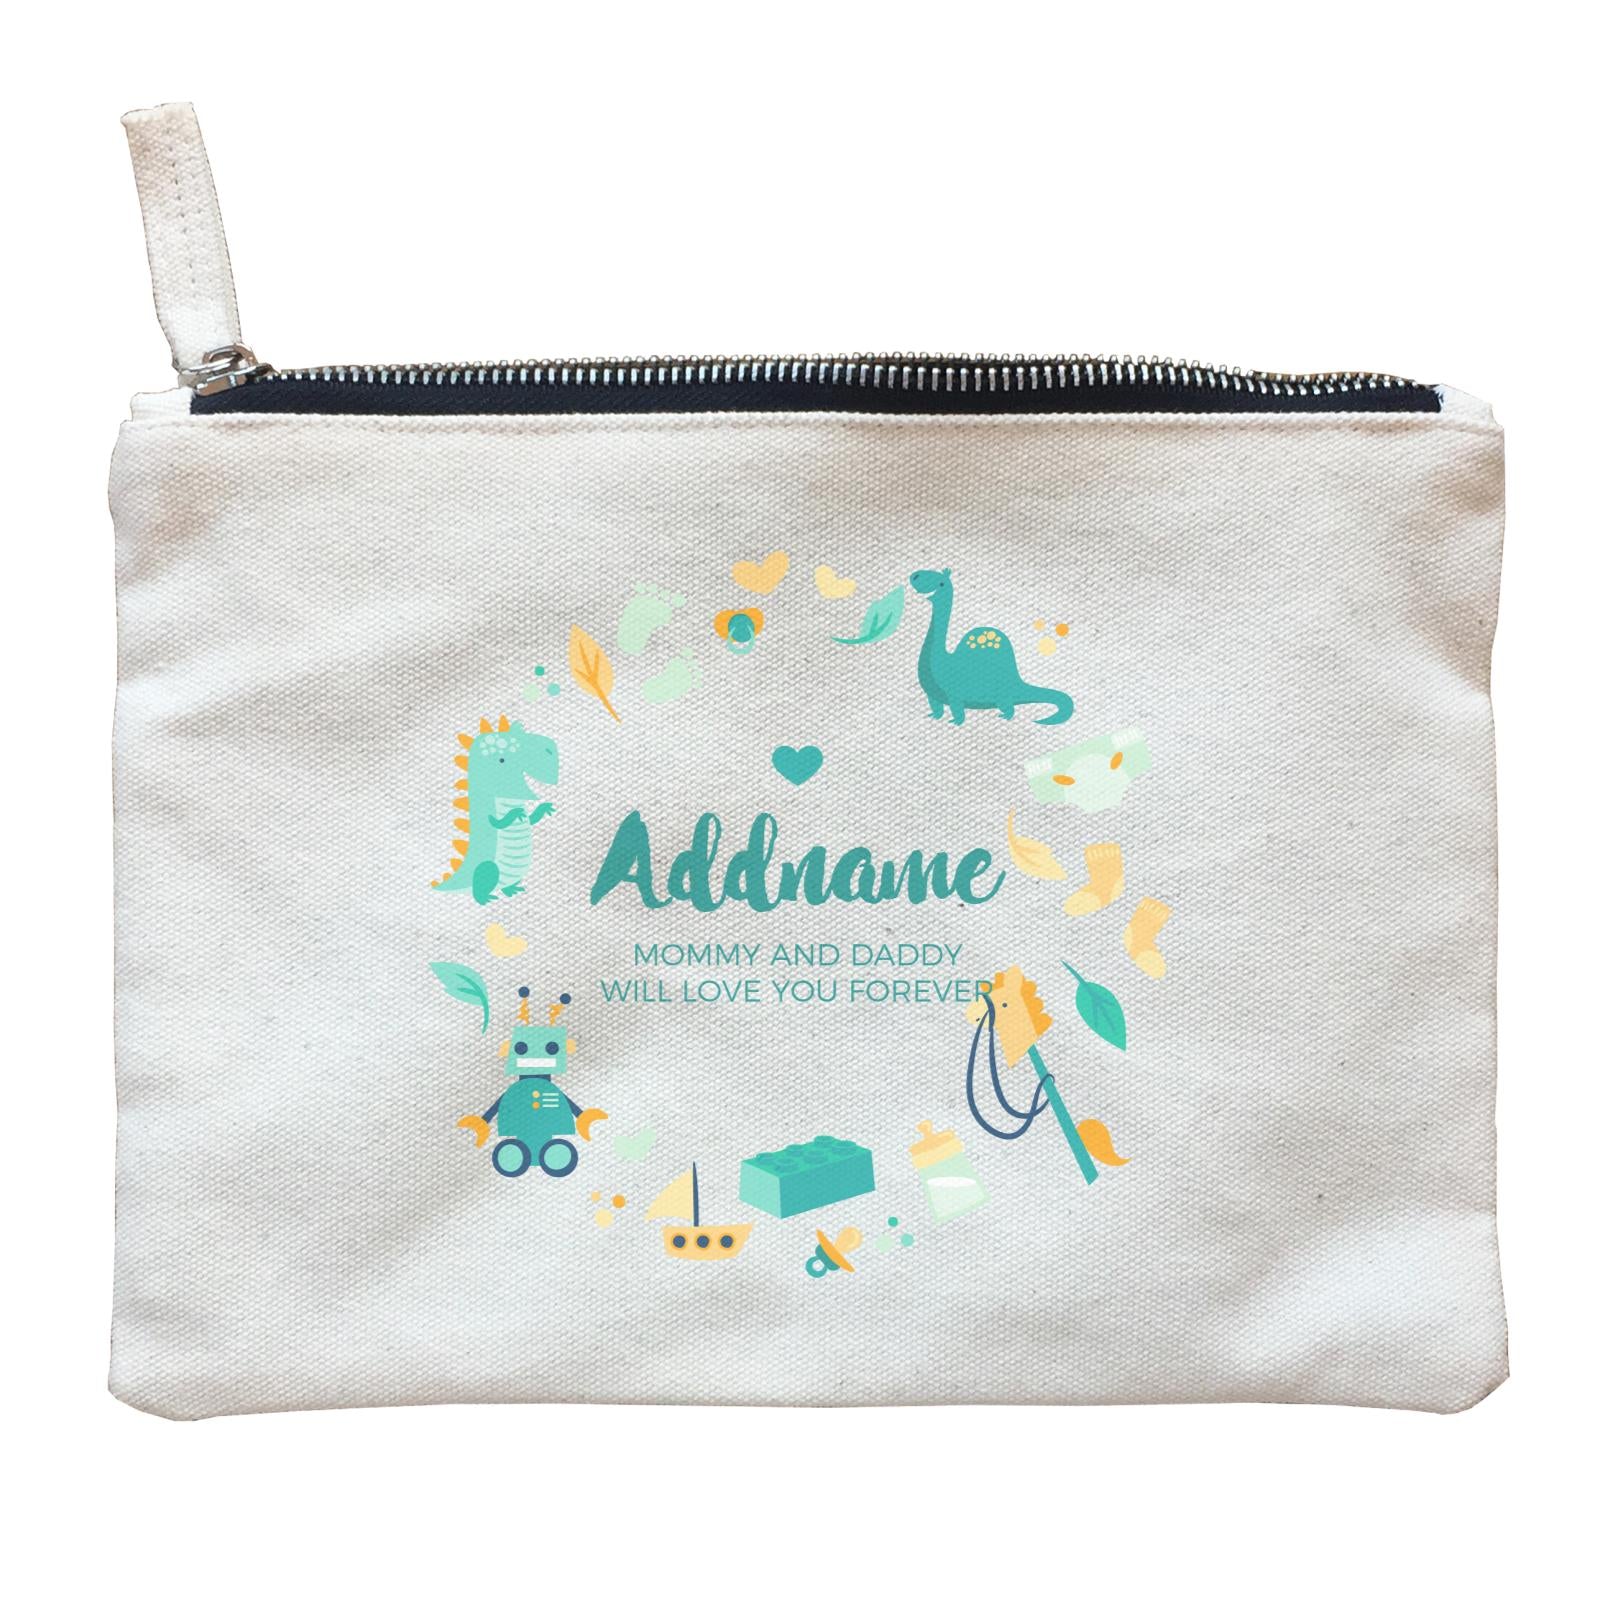 Cute Dinosaurs and Toys Elements Personalizable with Name and Text Zipper Pouch